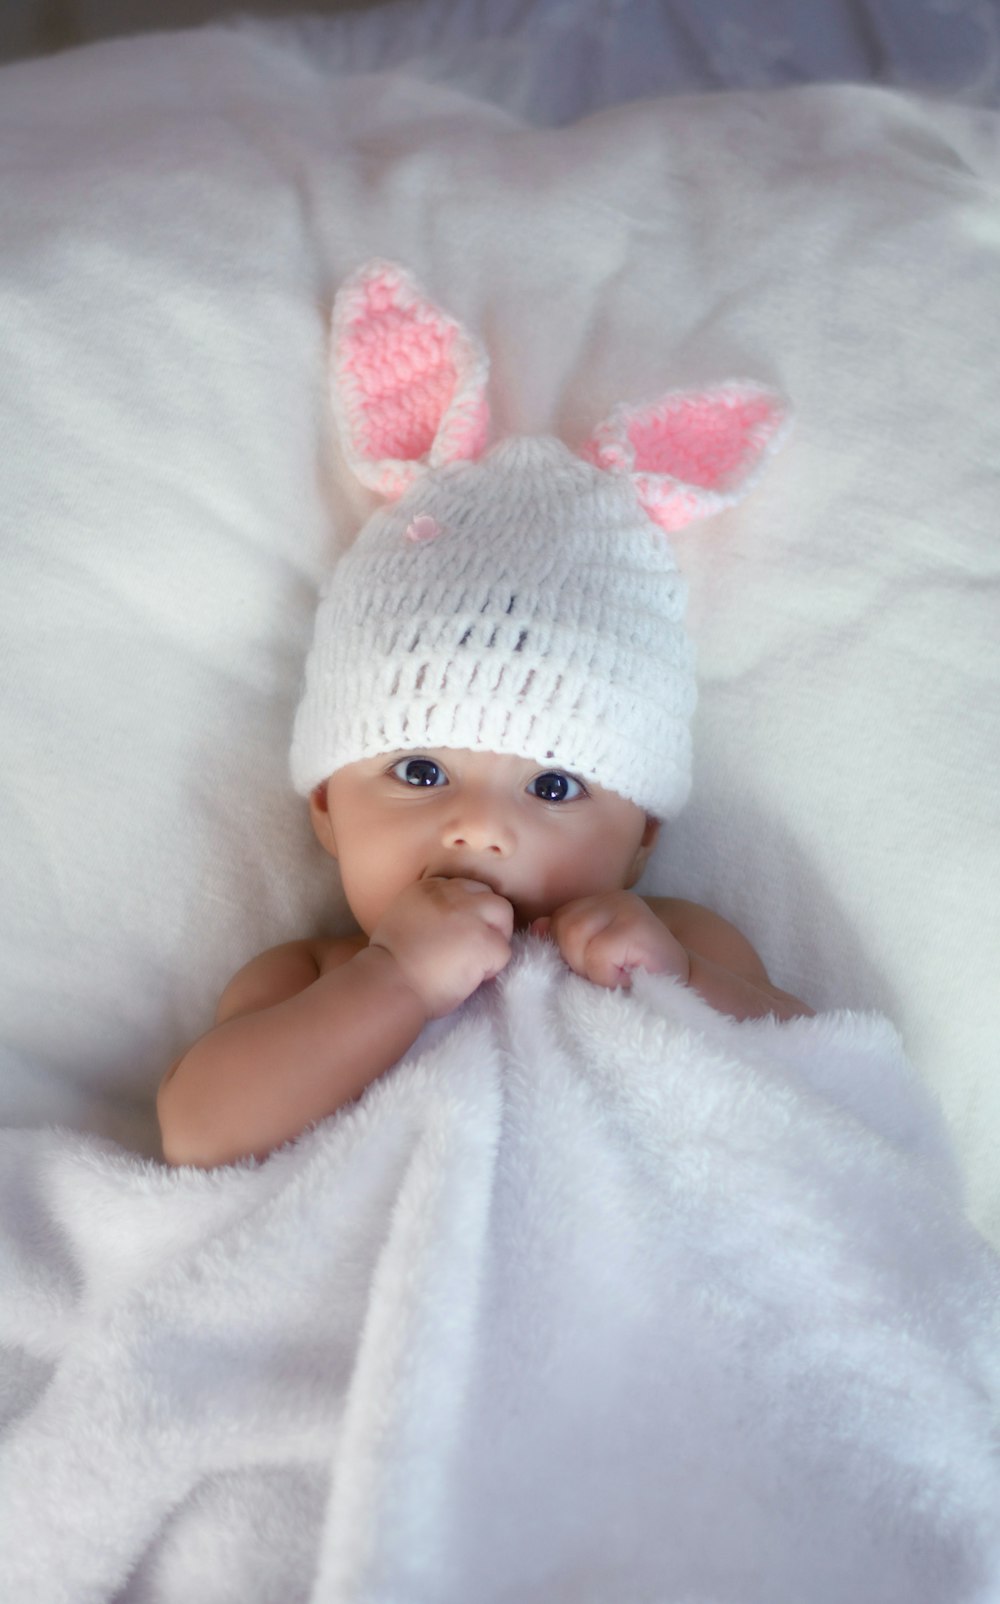 baby in white knit cap lying on white textile